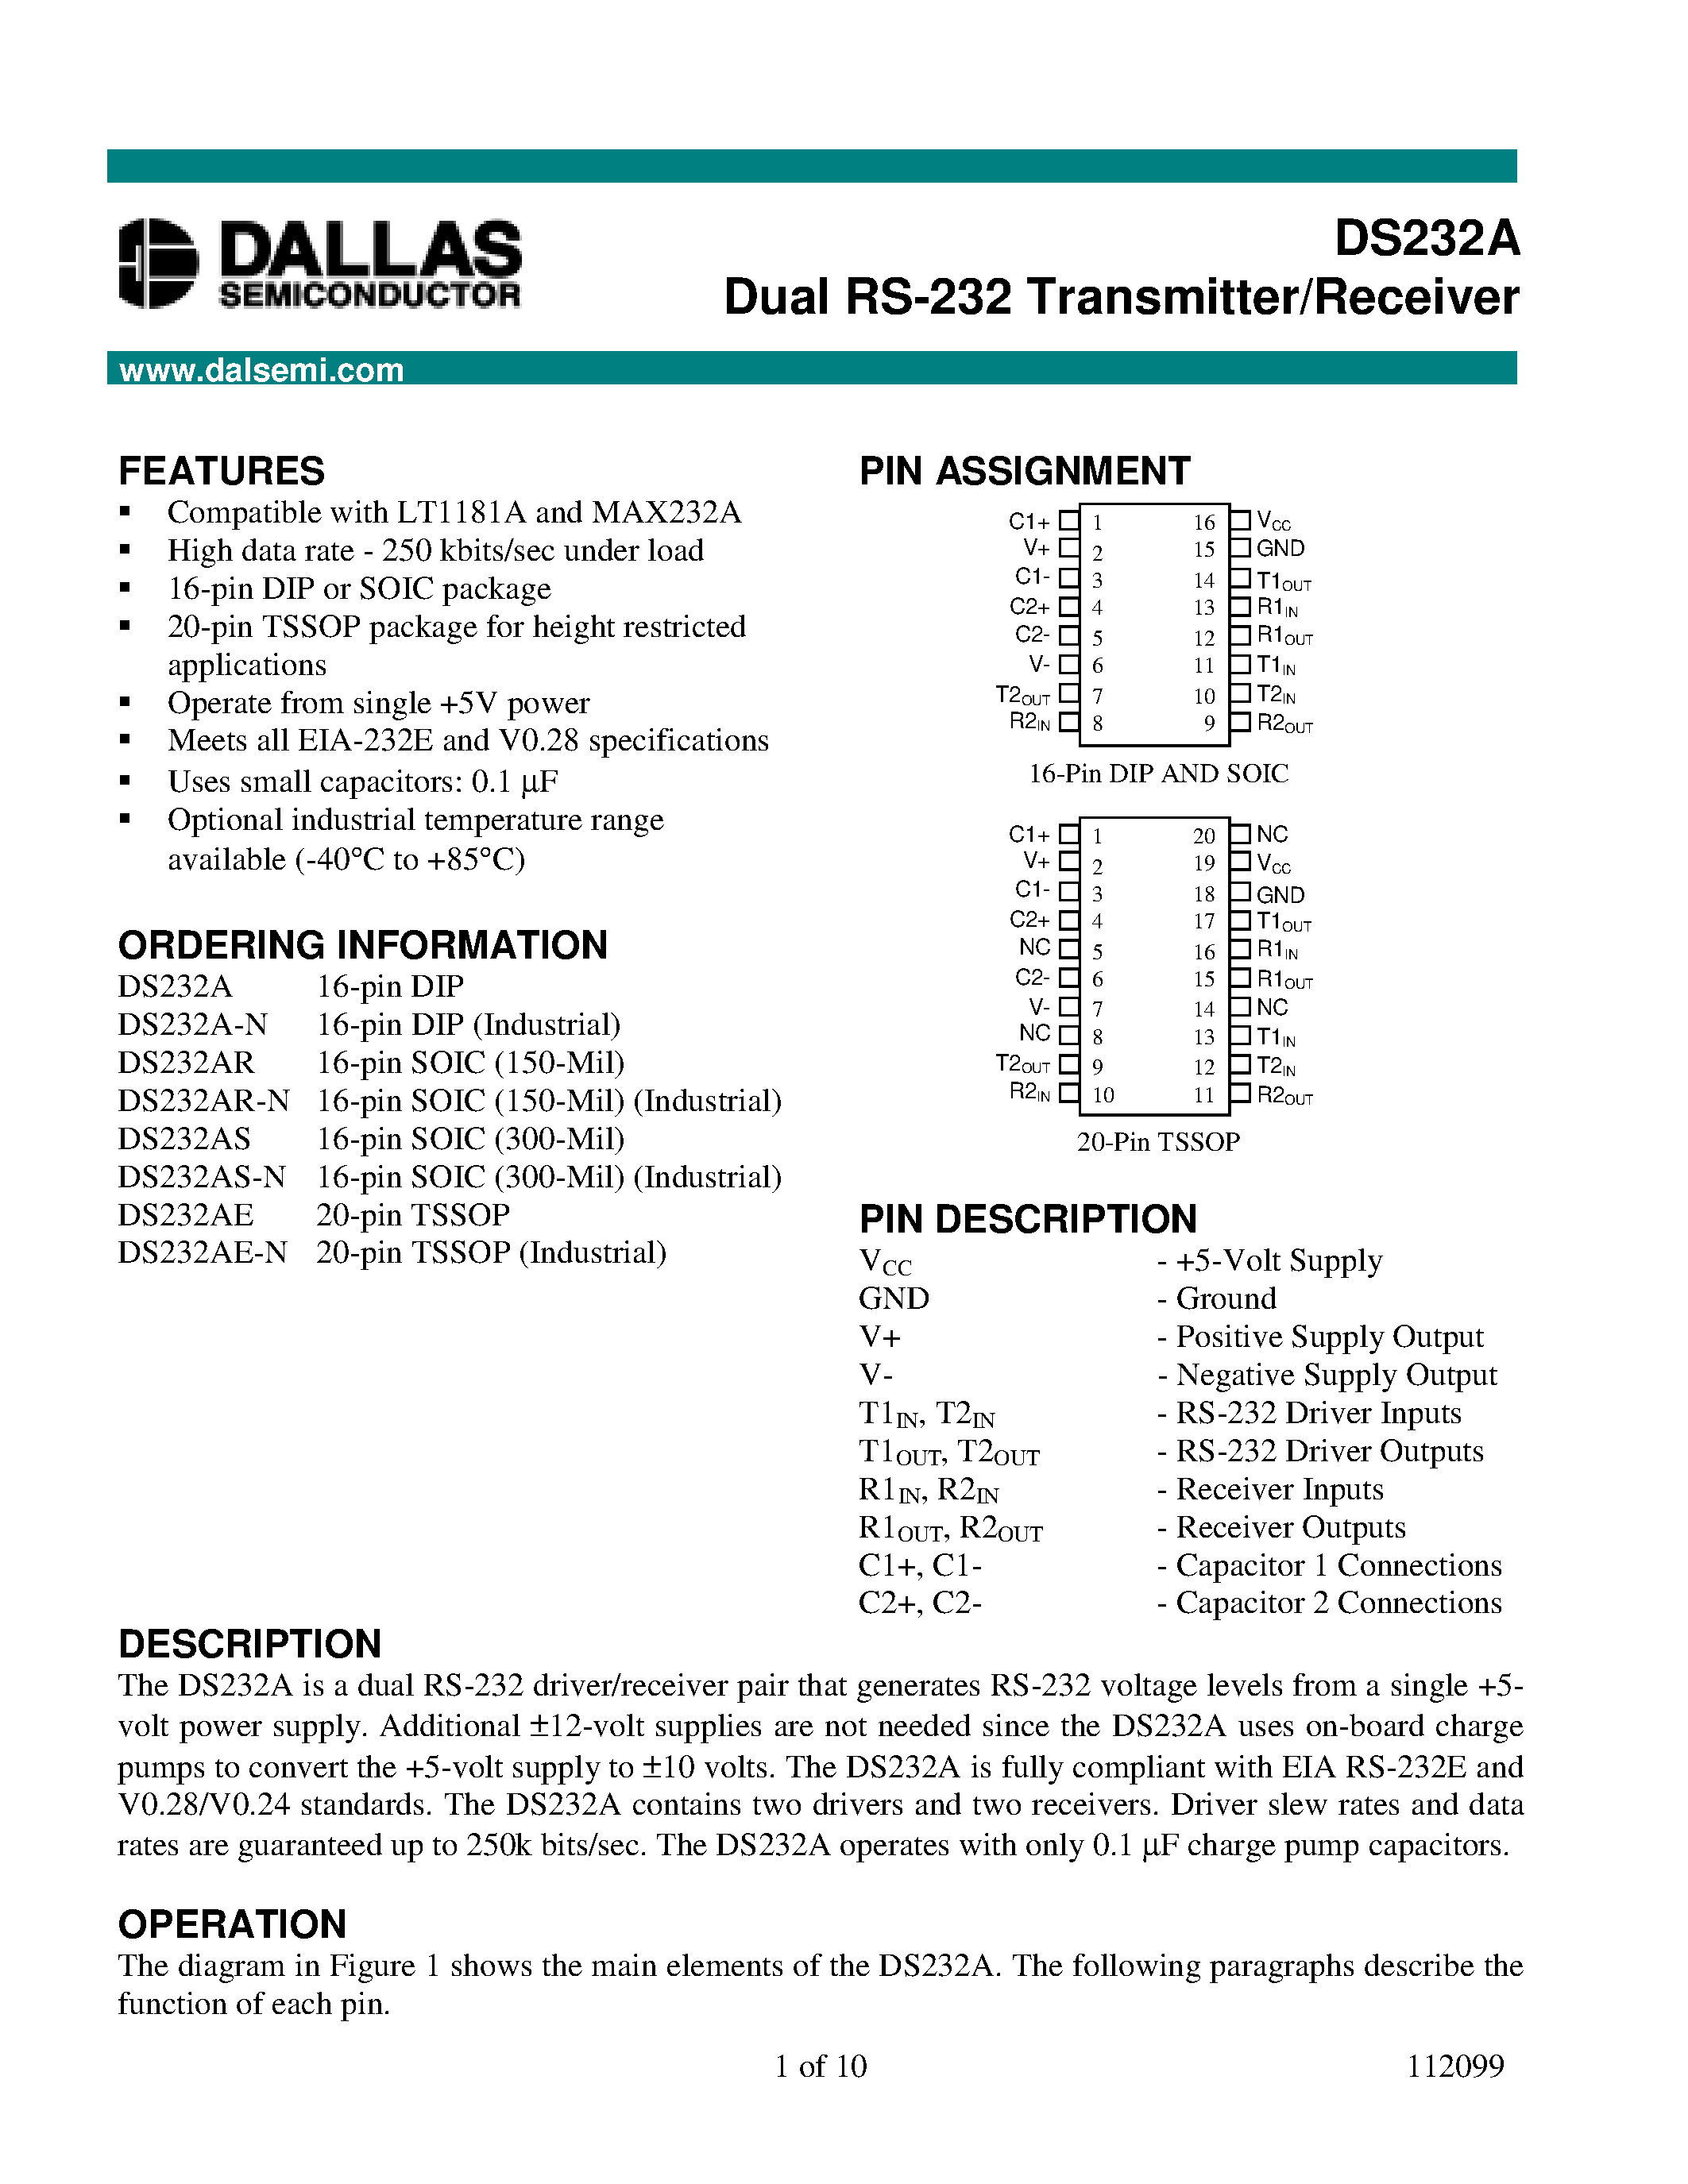 Даташит DS232AS-N - Dual RS-232 Transmitter/Receiver страница 1